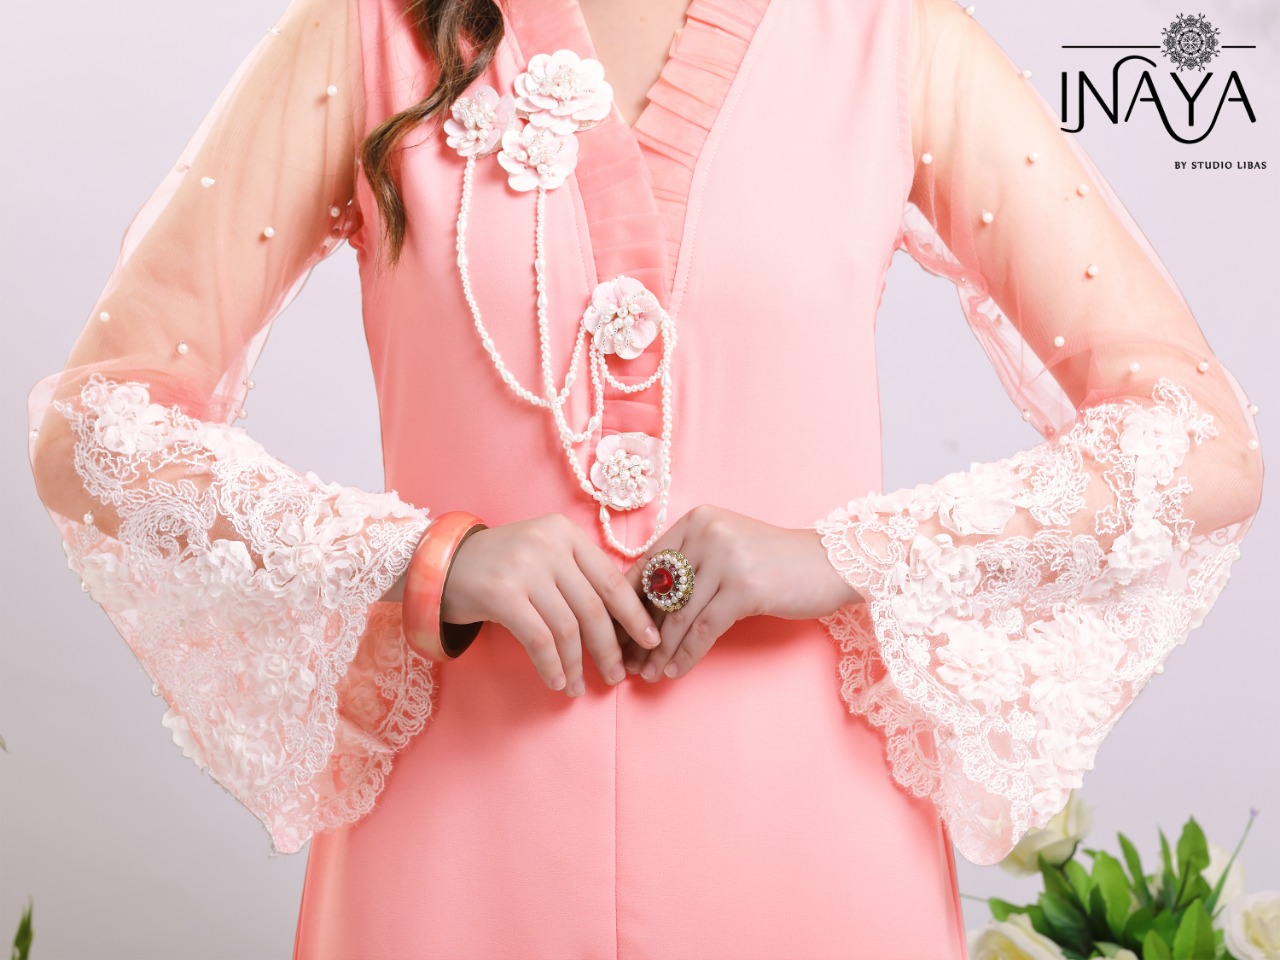 Inaya by studio libas luxury pret collection  presents festive season tunic Style kurti with bell pants concept